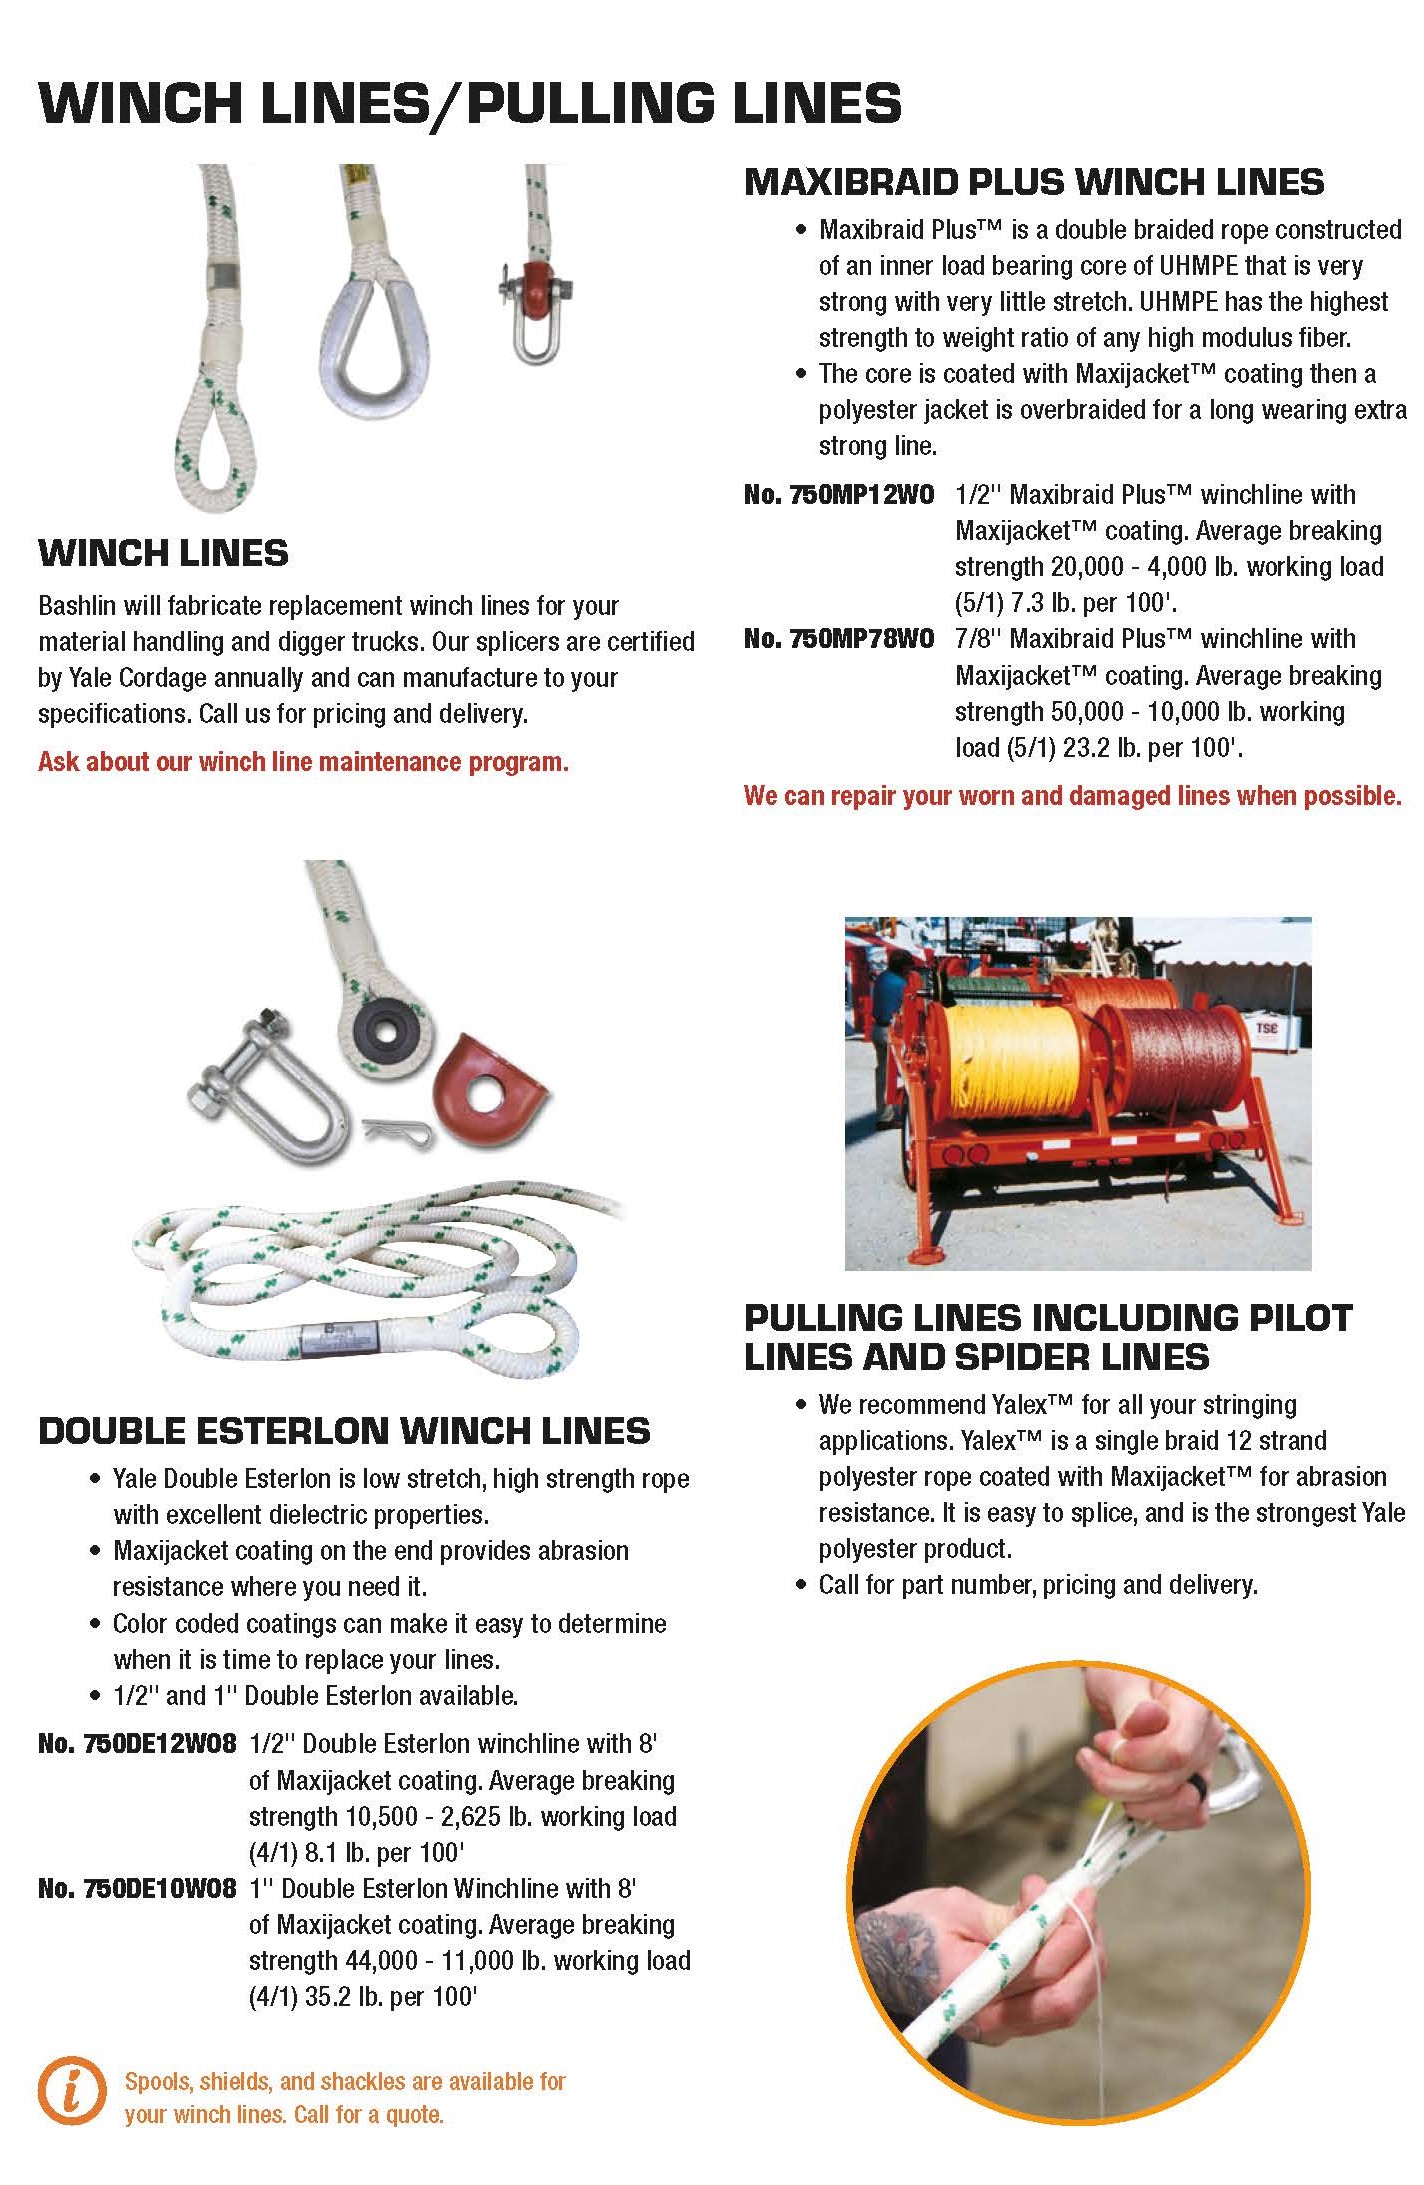 Winch Lines and Pulling Lines - Bashlin Industries, Inc.